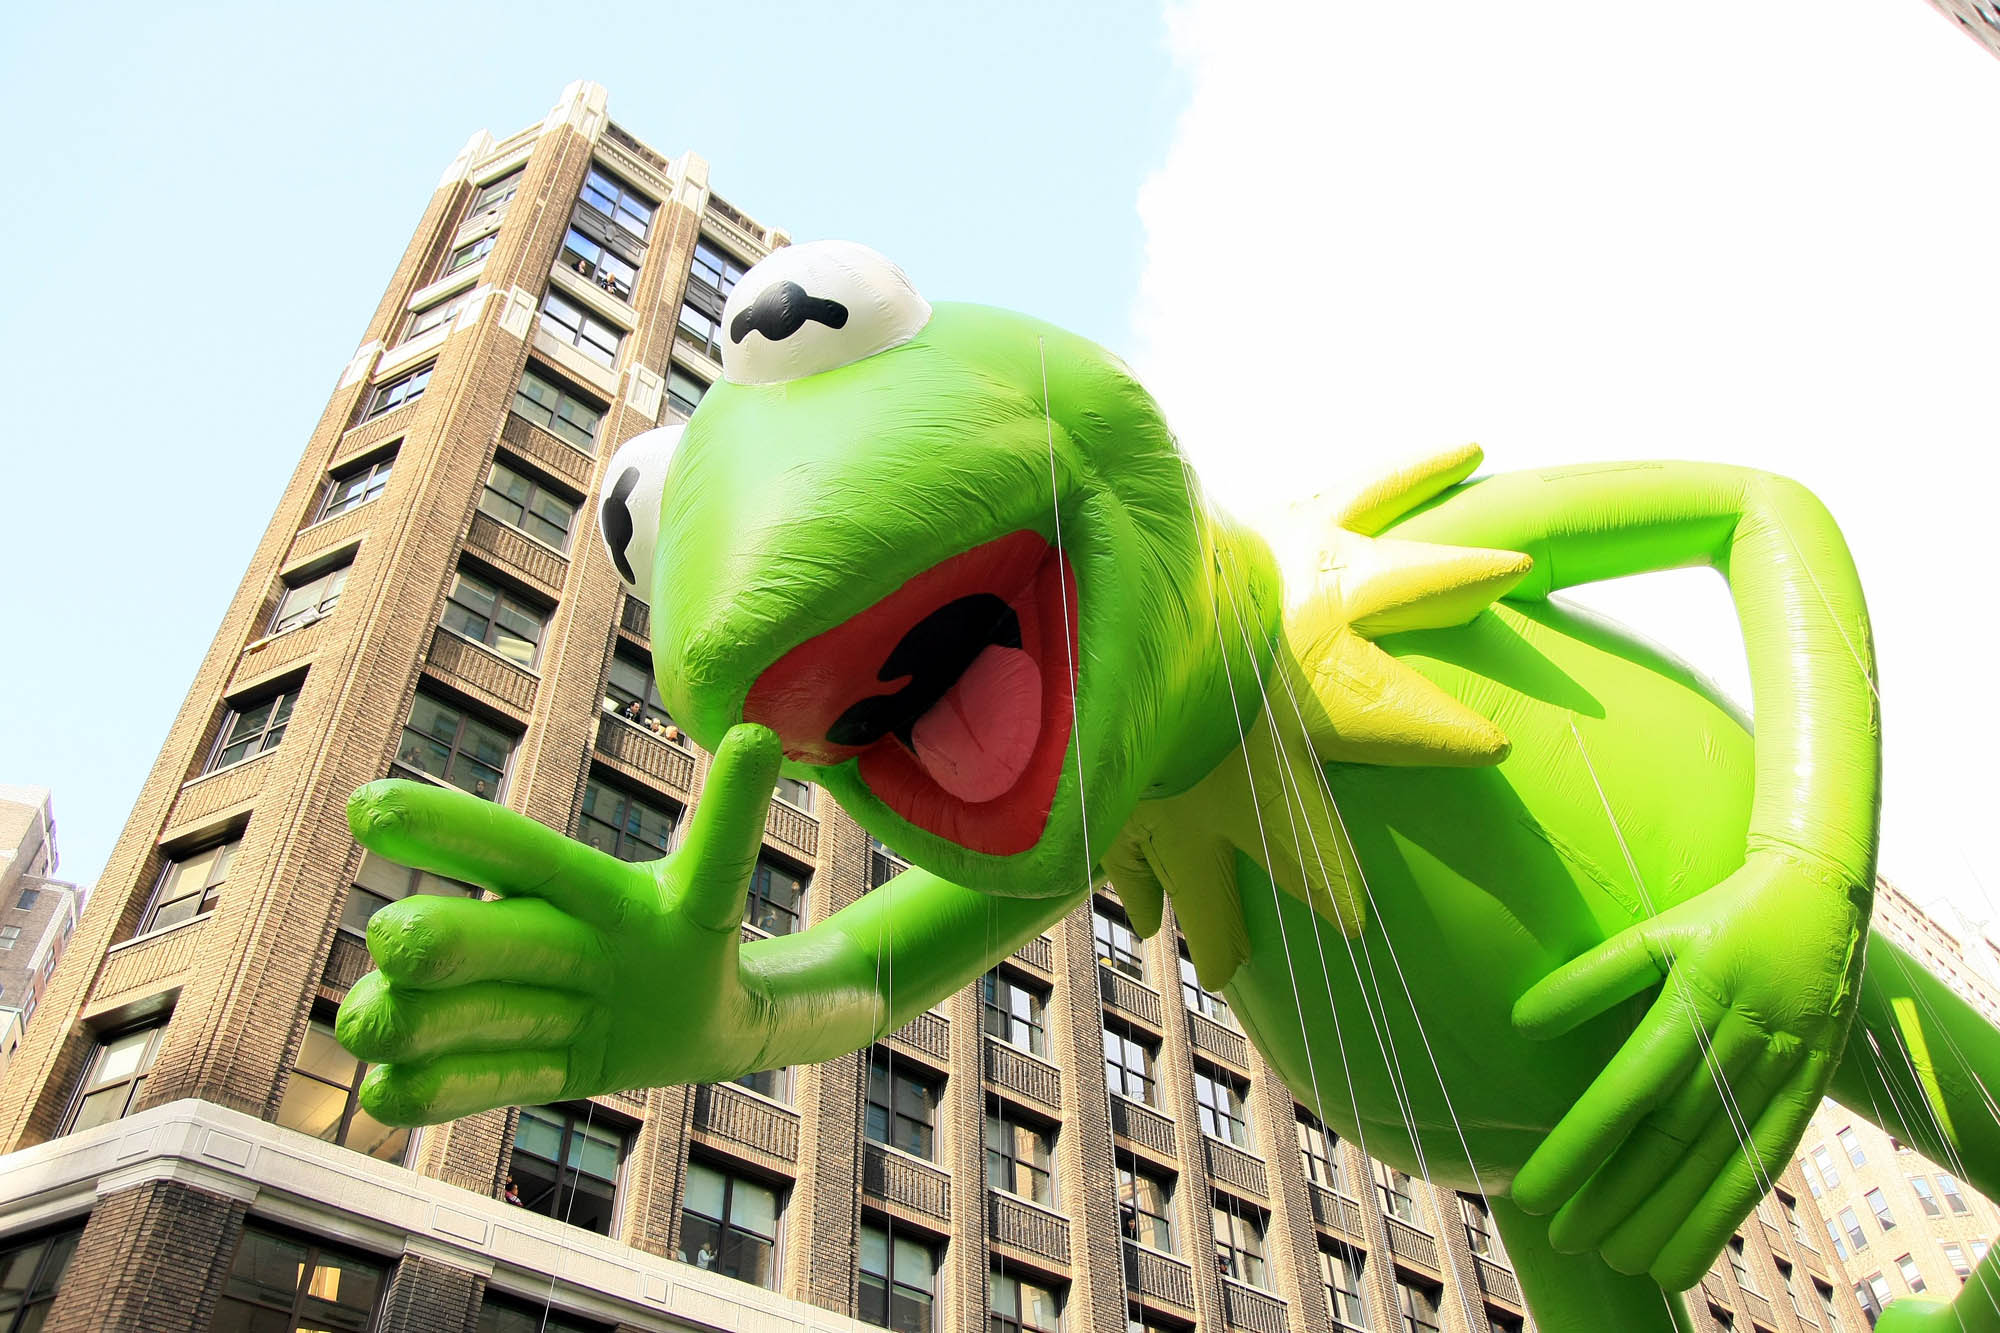 kermit_the_frog_in_macys_thanksgiving_day_parade